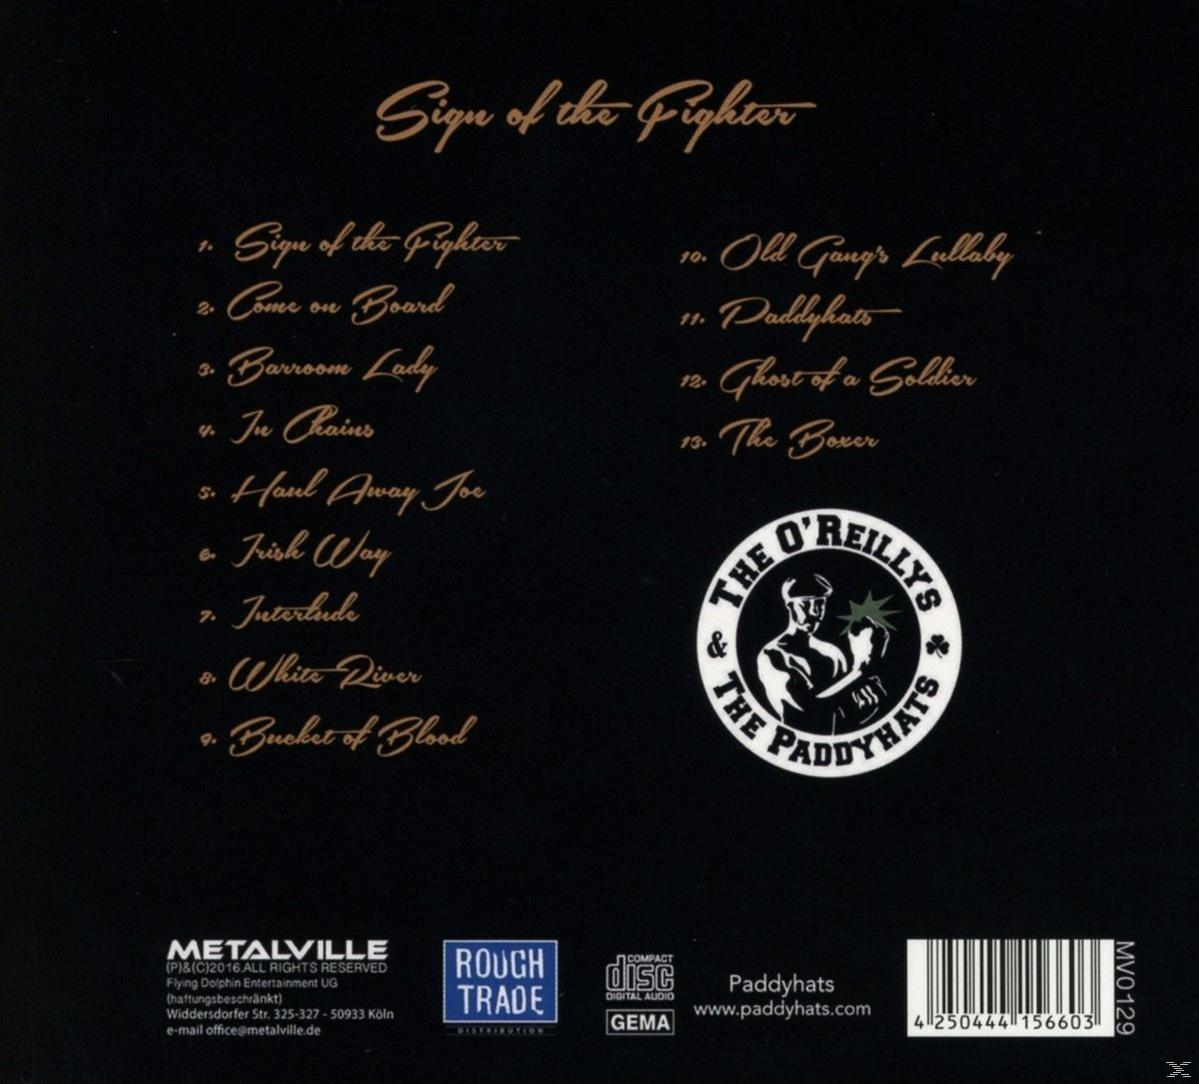 The O\'Reillys and - (Digipak) Paddyhats Of - Sign Fighter (CD) the The